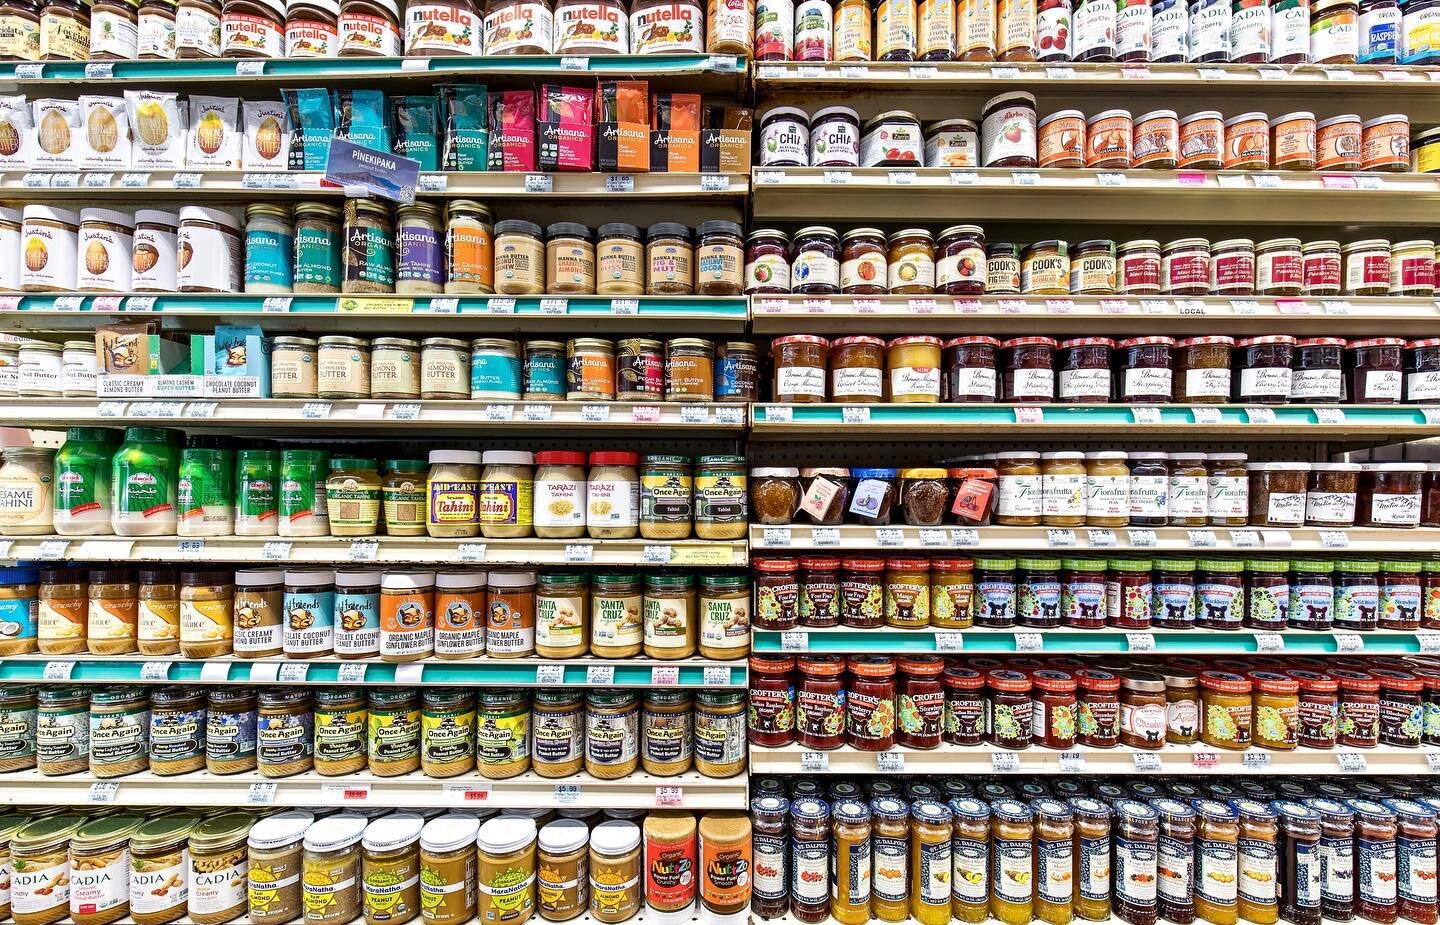 Mana&rsquo;s selection of nut butters, jams, and jellies! Because variety + quality = our jam!